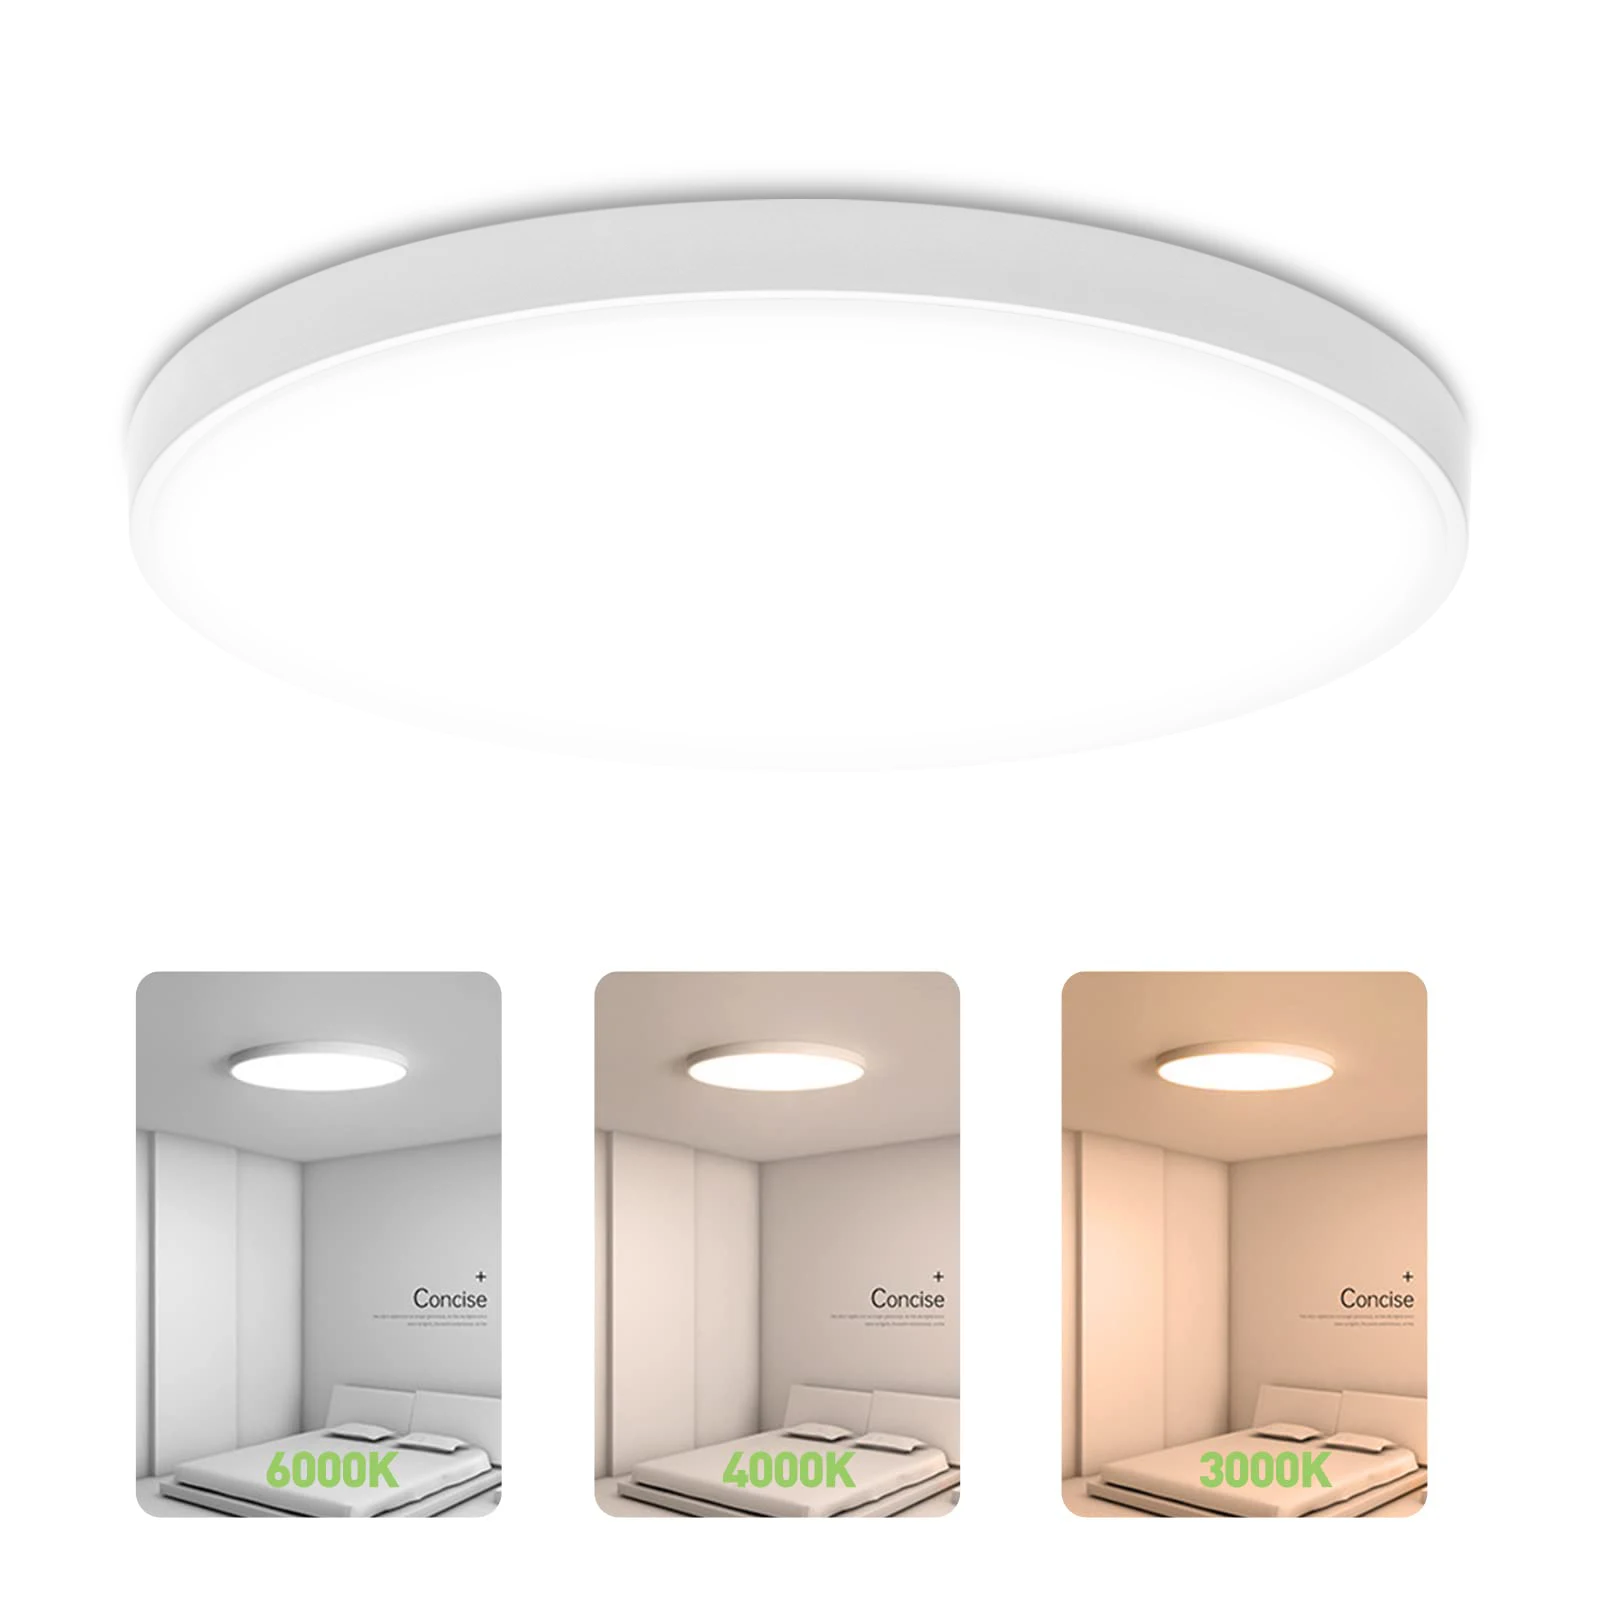 37cm Ultra Thin LED Ceiling Lamp 30W/40W/50W/72W LED Lights Indoor Modern Style Ring Ceiling Light for Kitchen Room Decor 220V led panel lights ceiling lights led panel board round module led light for room ceiling 220v 12w 18w 24w 36w 72w cool white 2psc